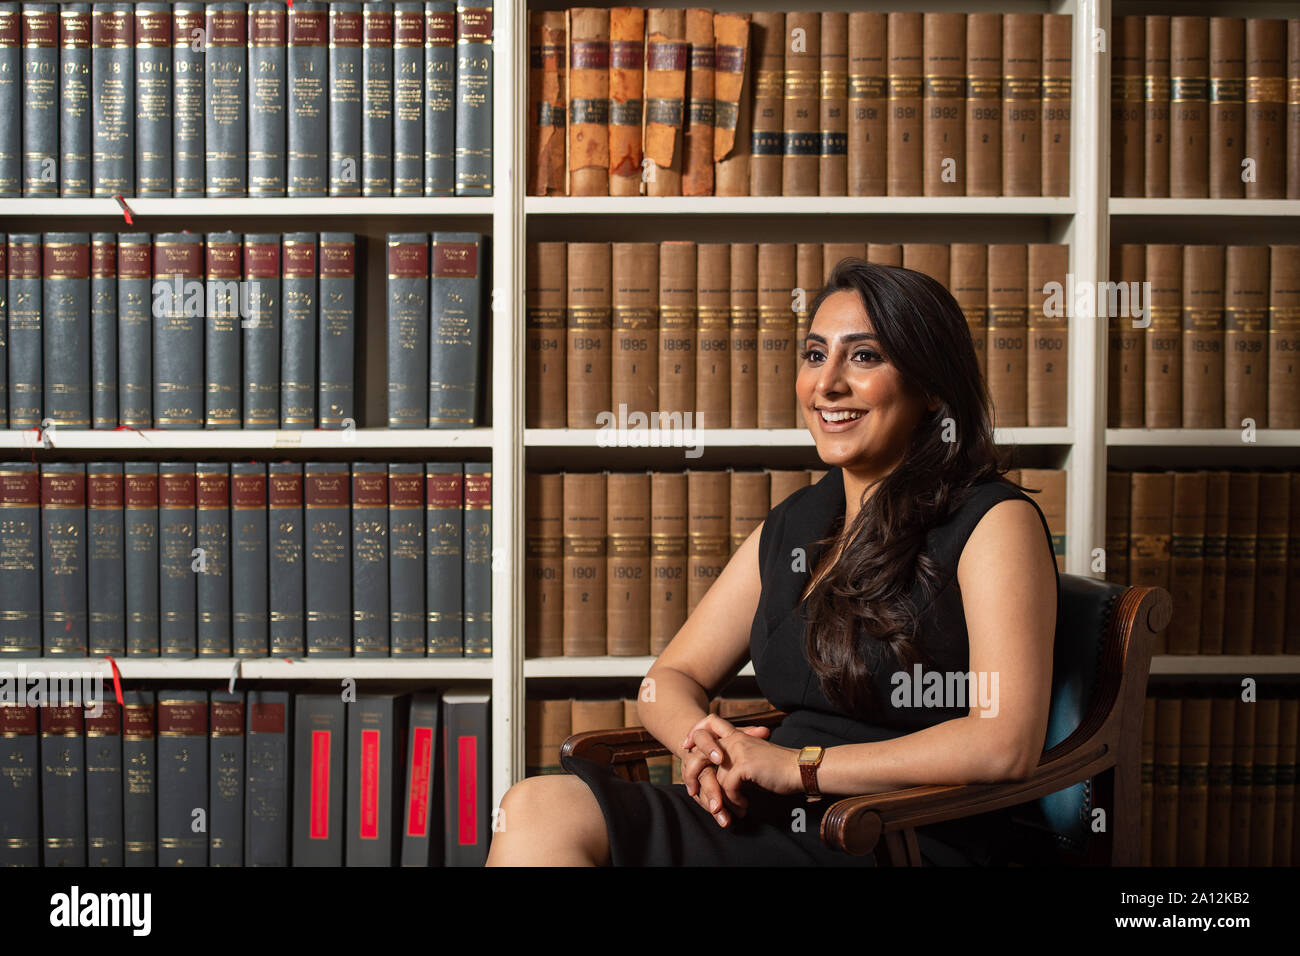 Barrister Rehana Popal, who is one of 10 social mobility advocates for the Bar Council in 2019, at King's Bench Walk Chambers, London. Stock Photo